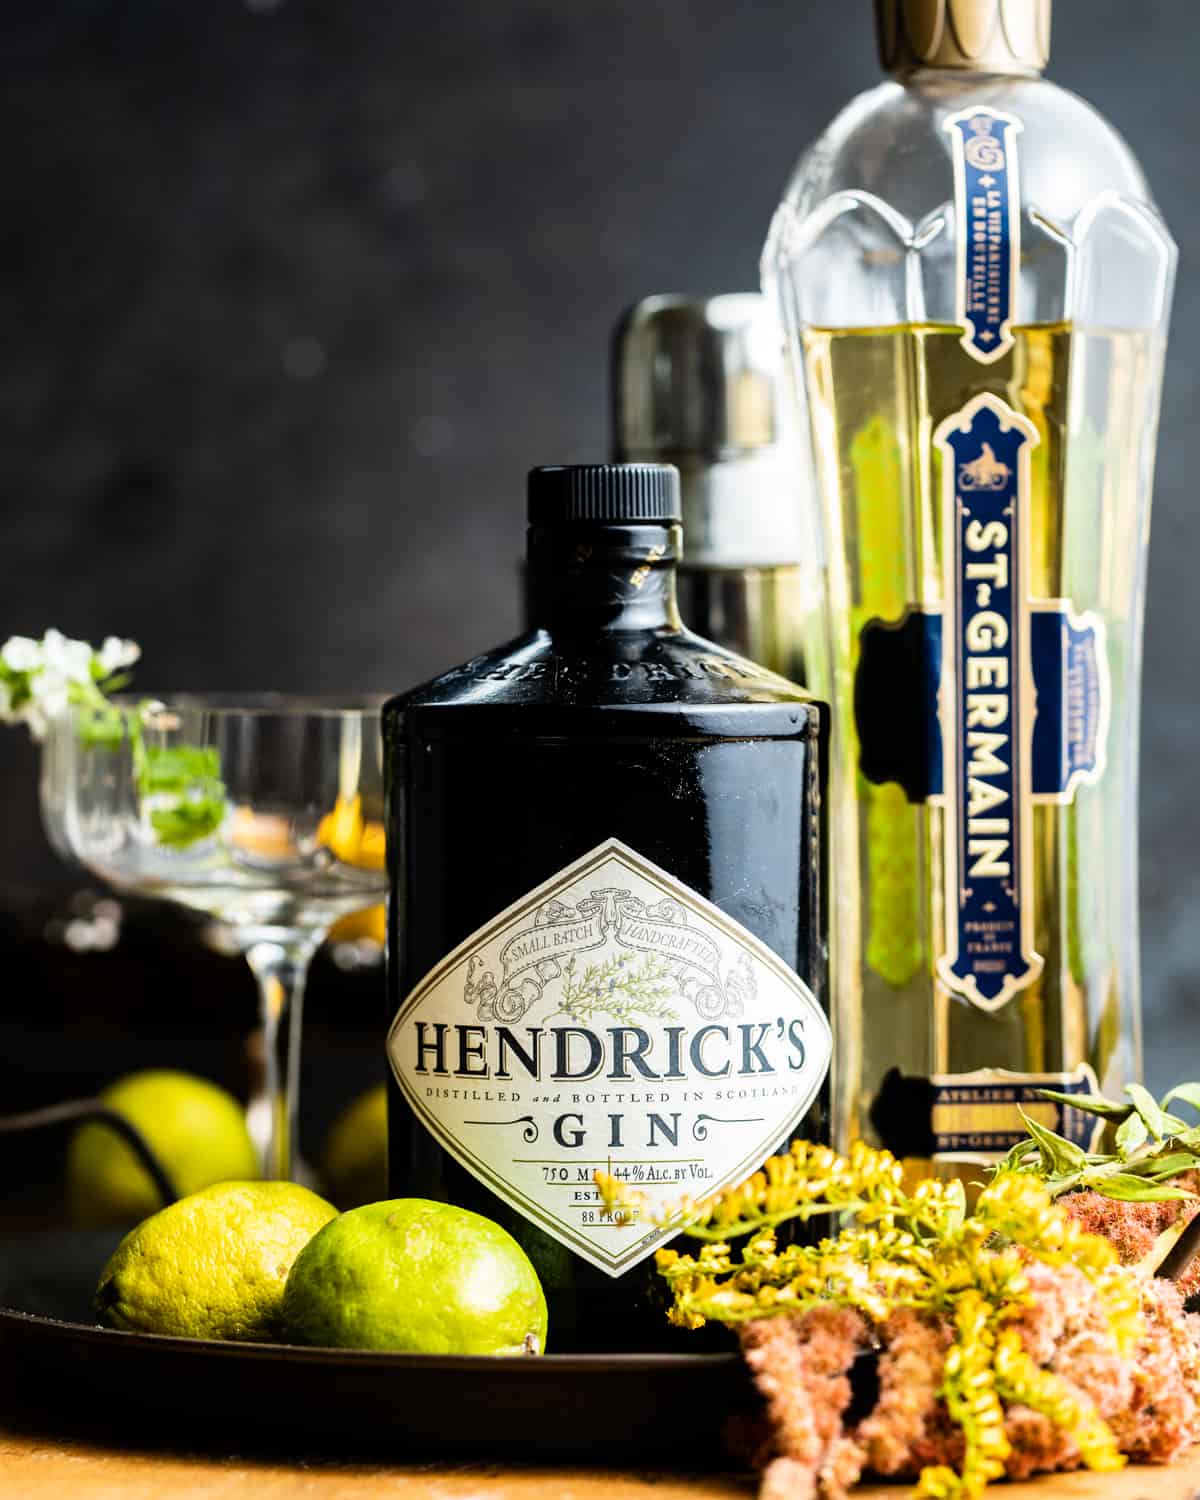 ingredients to make a french gimlet - gin, elderflower liqueur, and lime juice.